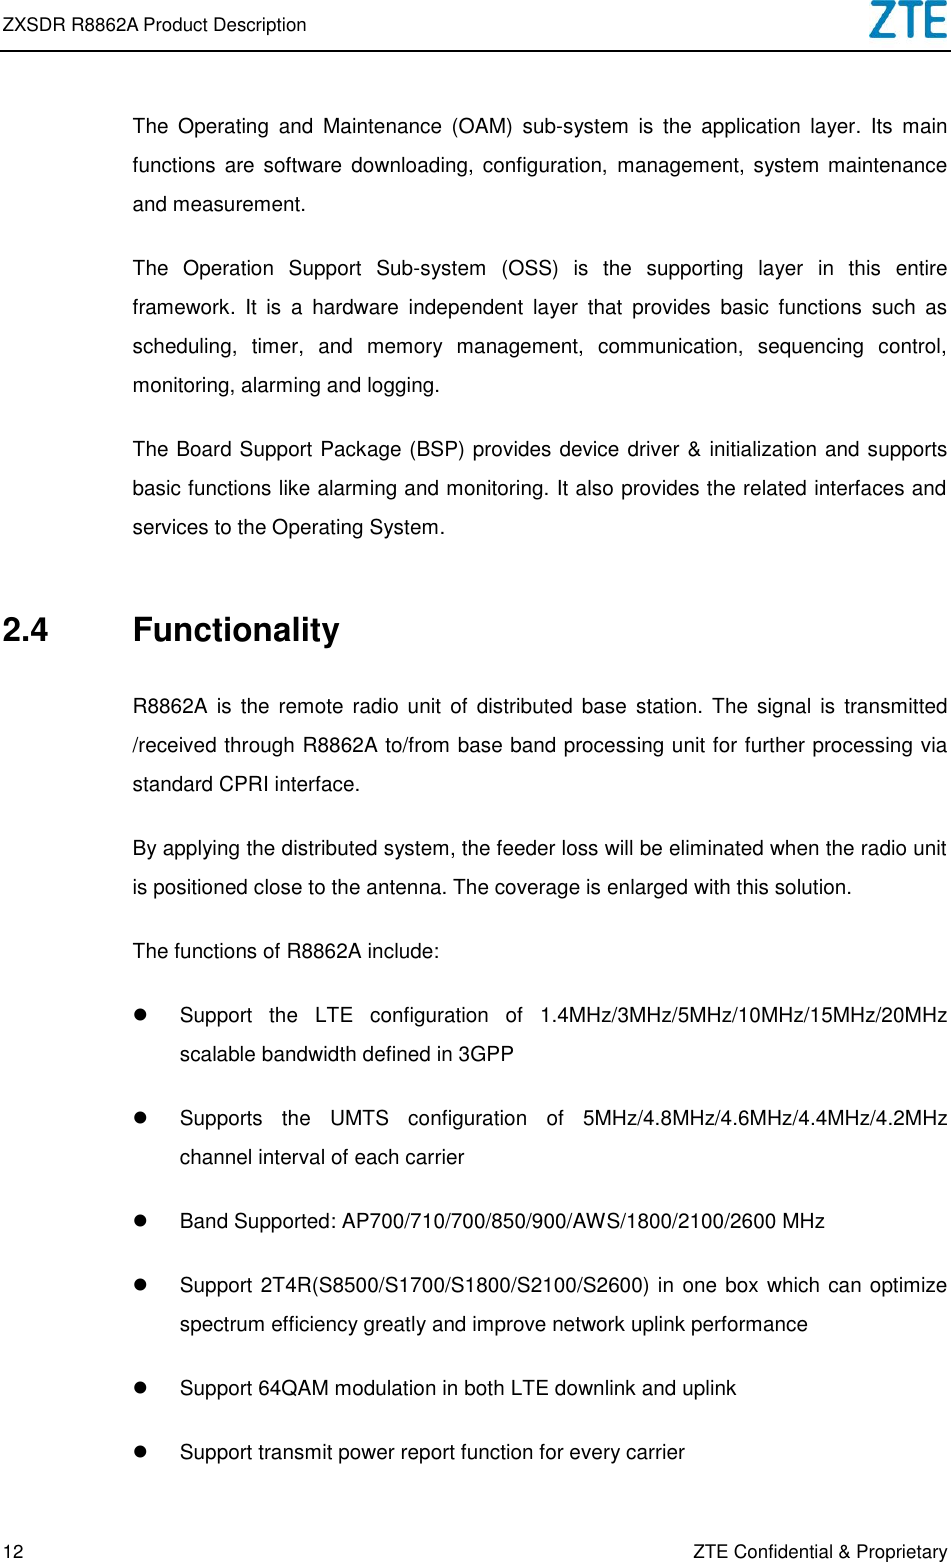 ZXSDR R8862A Product Description   12 ZTE Confidential &amp; Proprietary The  Operating  and  Maintenance  (OAM)  sub-system  is  the  application  layer.  Its  main functions  are software  downloading,  configuration,  management,  system maintenance and measurement. The  Operation  Support  Sub-system  (OSS)  is  the  supporting  layer  in  this  entire framework.  It  is  a  hardware  independent  layer  that  provides  basic  functions  such  as scheduling,  timer,  and  memory  management,  communication,  sequencing  control, monitoring, alarming and logging. The Board Support Package (BSP) provides device driver &amp; initialization and supports basic functions like alarming and monitoring. It also provides the related interfaces and services to the Operating System. 2.4  Functionality R8862A  is the  remote  radio unit  of  distributed  base  station. The  signal is  transmitted /received through R8862A to/from base band processing unit for further processing via standard CPRI interface. By applying the distributed system, the feeder loss will be eliminated when the radio unit is positioned close to the antenna. The coverage is enlarged with this solution. The functions of R8862A include:   Support  the  LTE  configuration  of  1.4MHz/3MHz/5MHz/10MHz/15MHz/20MHz scalable bandwidth defined in 3GPP   Supports  the  UMTS  configuration  of  5MHz/4.8MHz/4.6MHz/4.4MHz/4.2MHz channel interval of each carrier   Band Supported: AP700/710/700/850/900/AWS/1800/2100/2600 MHz   Support 2T4R(S8500/S1700/S1800/S2100/S2600) in one box which can optimize spectrum efficiency greatly and improve network uplink performance     Support 64QAM modulation in both LTE downlink and uplink   Support transmit power report function for every carrier 